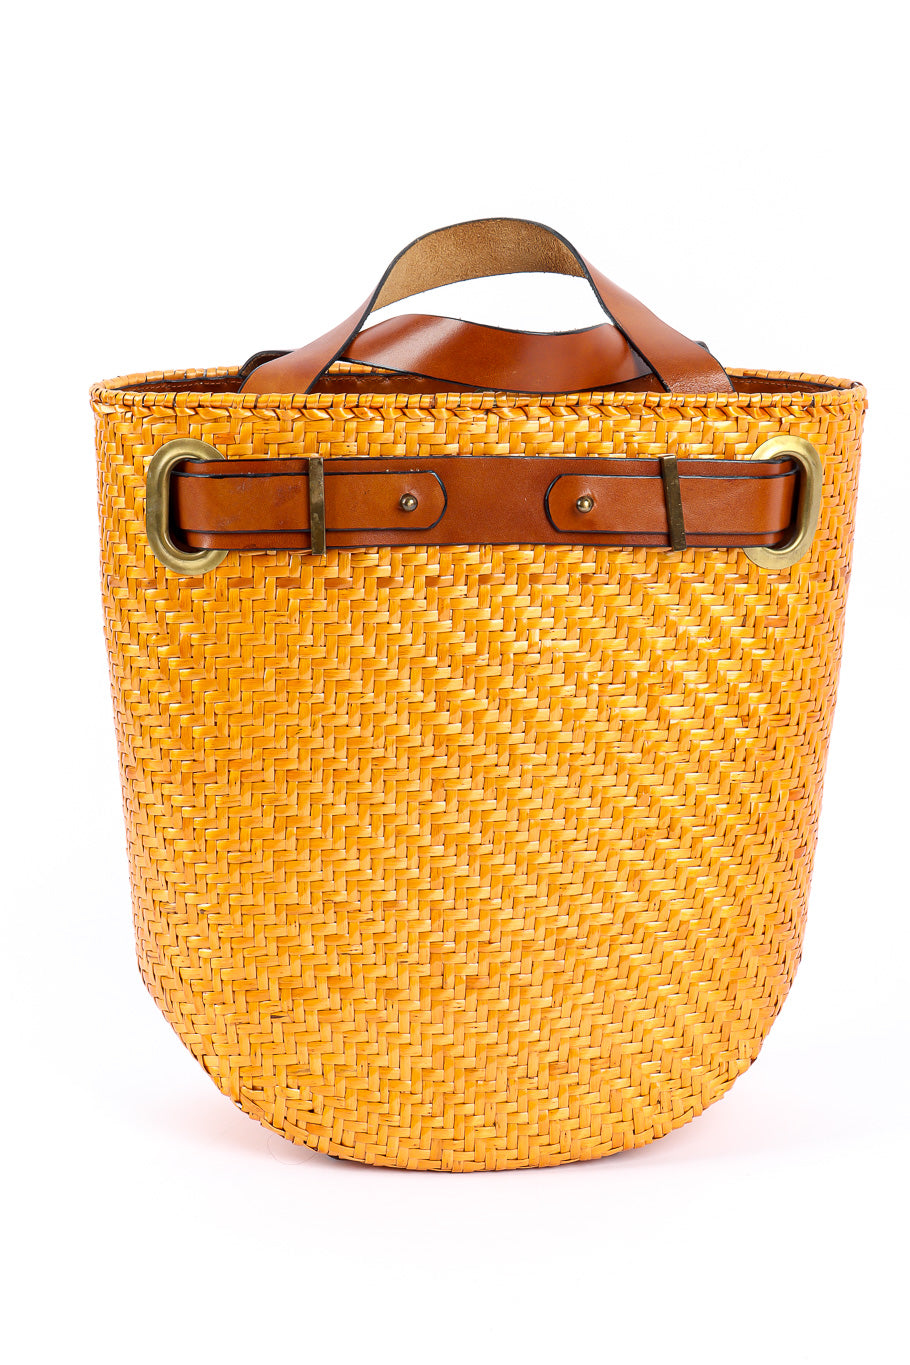 Vintage Rodo Wicker and leather tote bag product shot @recessla